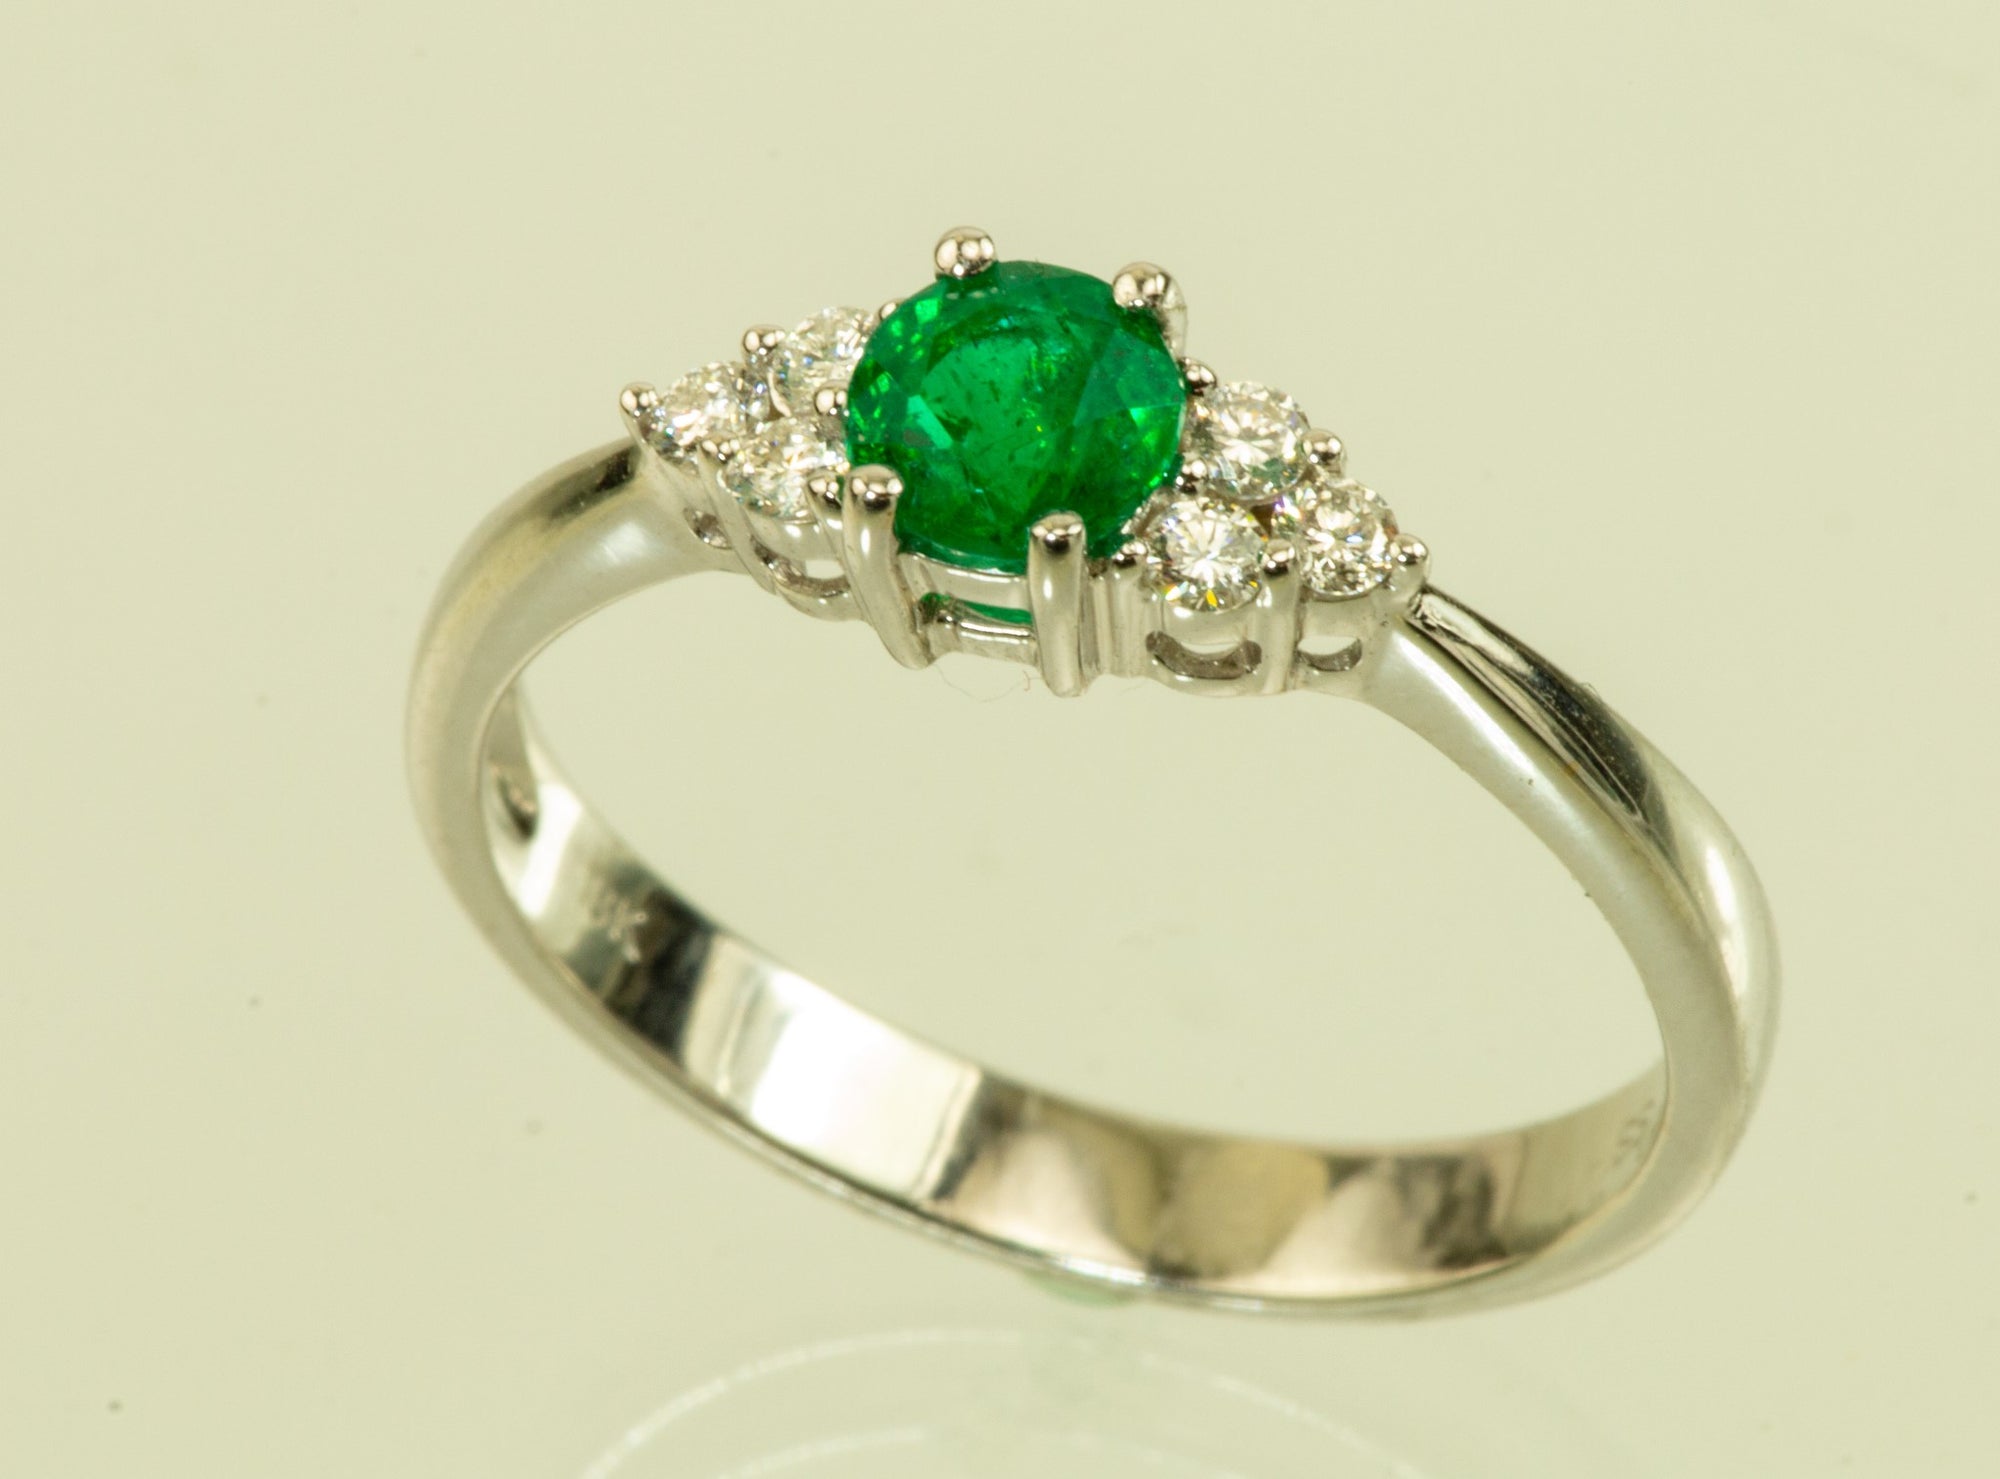 Emerald 18kt White Gold Ring With Diamonds